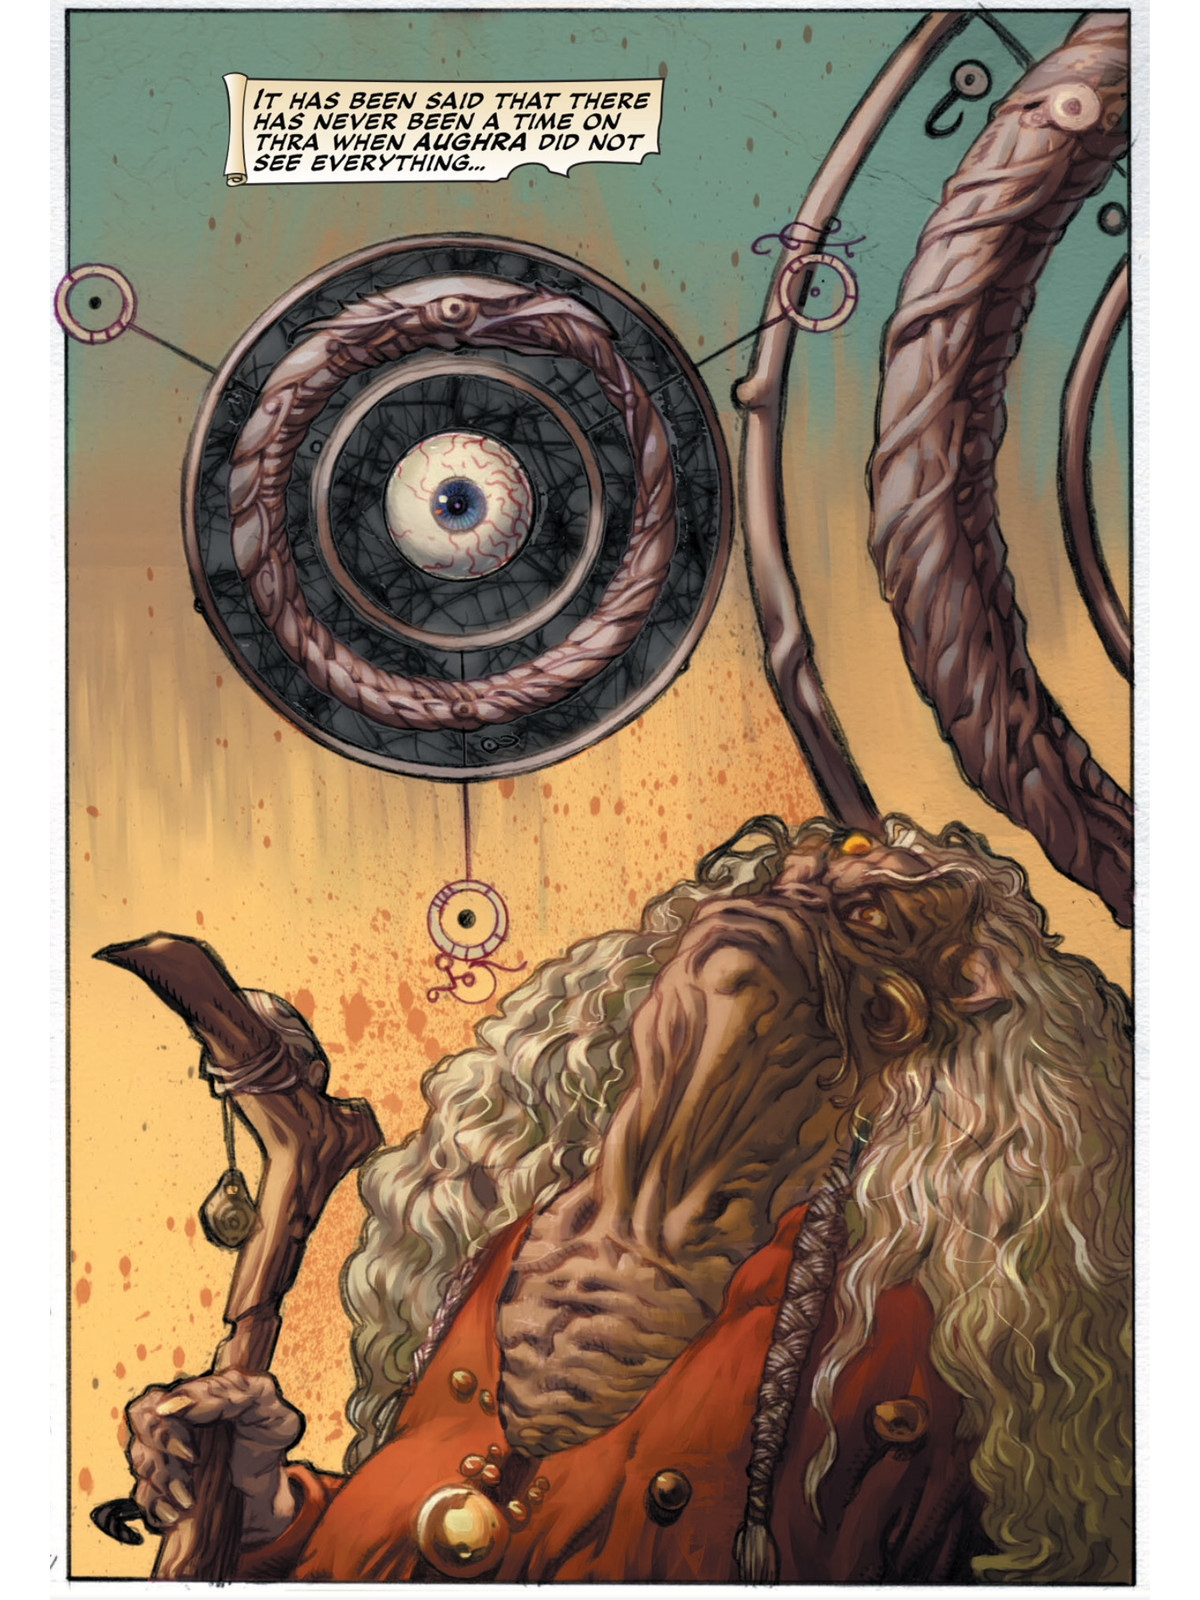 A comic panel showing Aughra and her all-seeing eye.